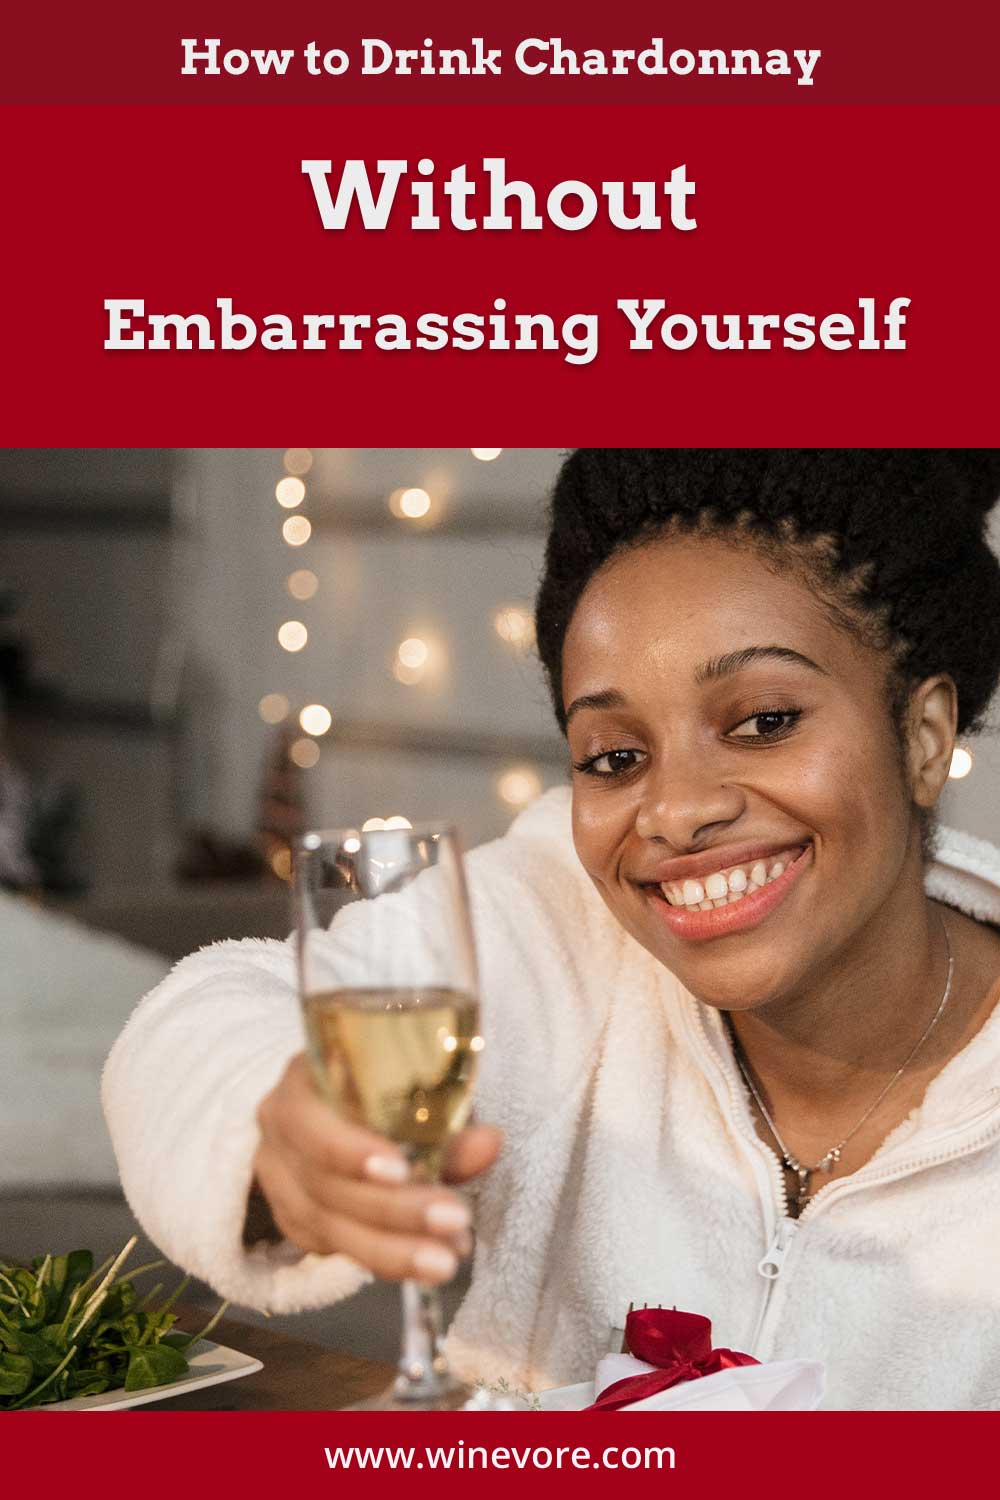 Woman smiling with a glass of wine in her hand - How to Drink Chardonnay Without Embarrassing Yourself?